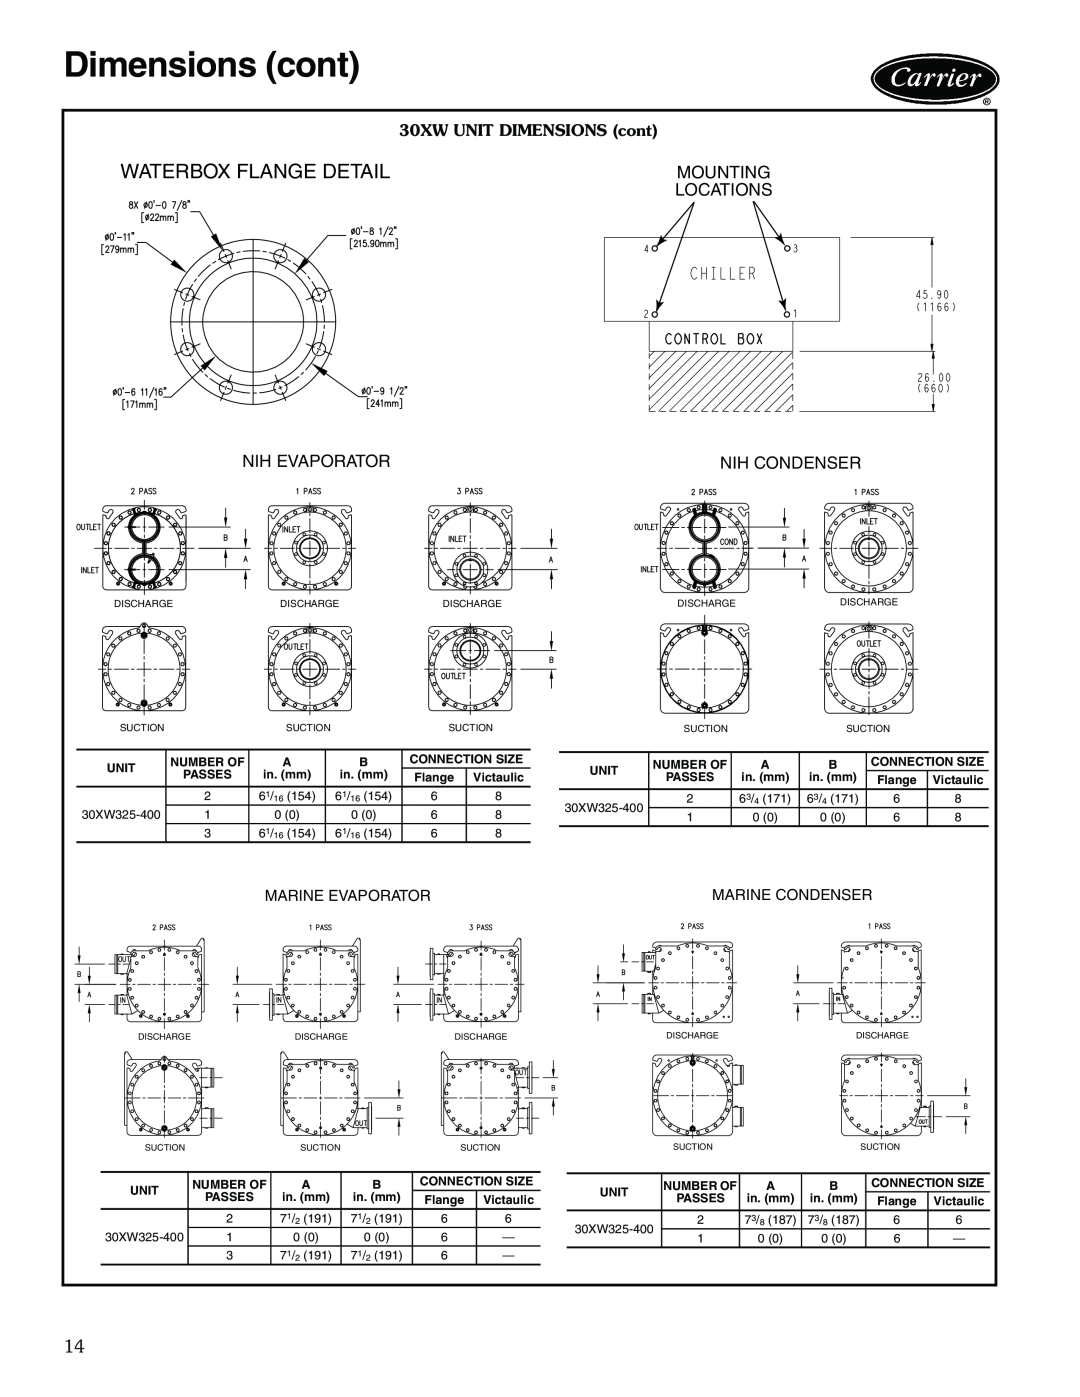 Carrier 30XW325-400 Dimensions cont, Waterbox Flange Detail, a30-4725, Nih Evaporator, a30-4751, Nih Condenser, a30-4749 